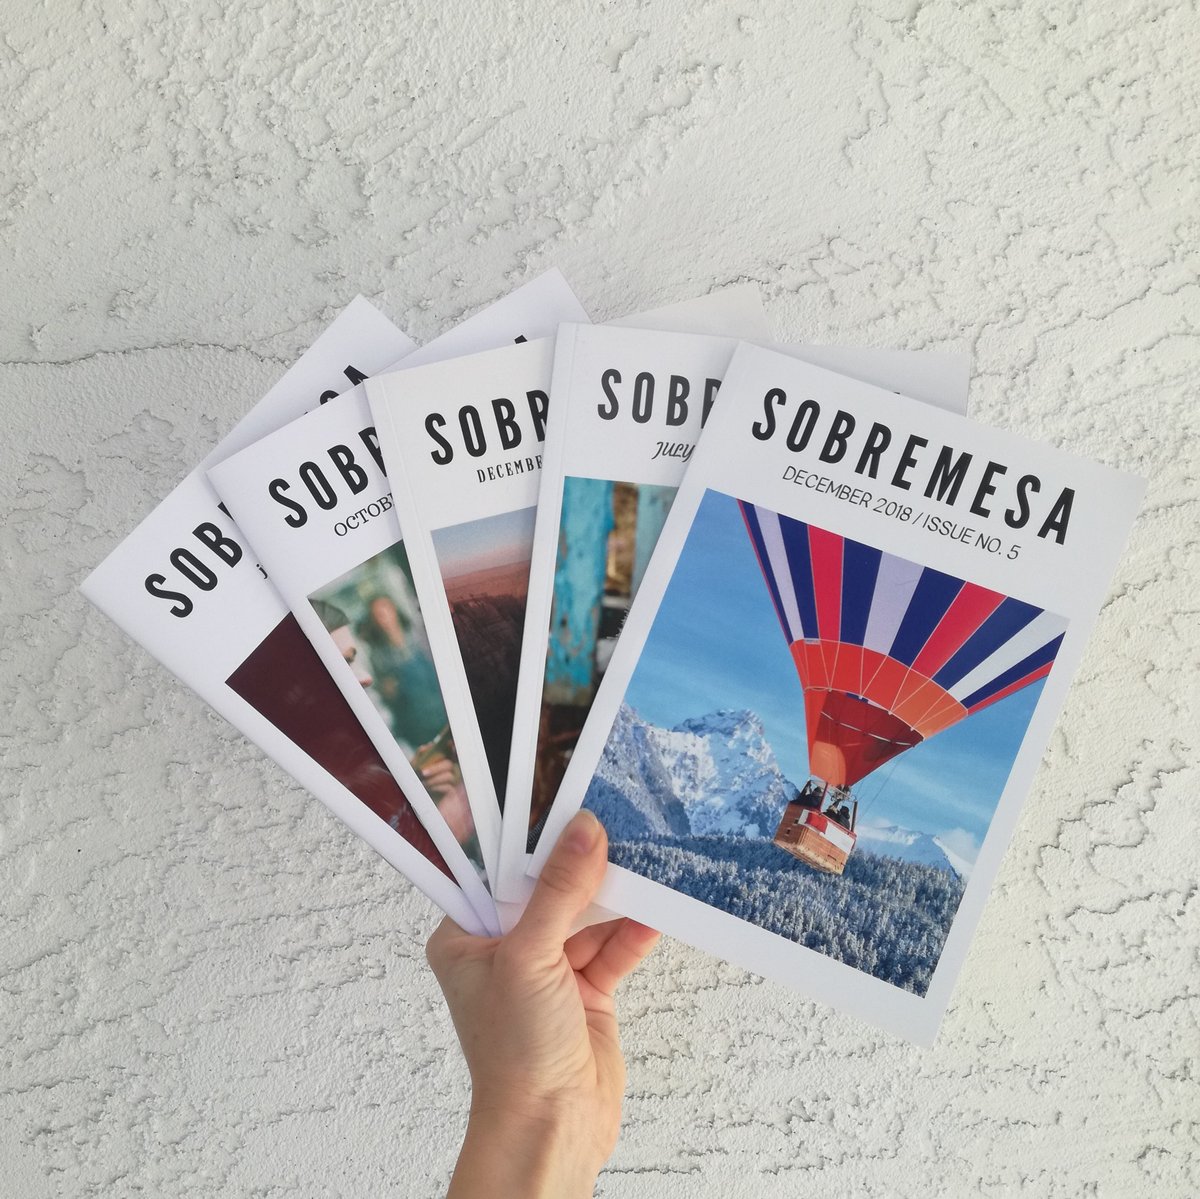 Image of Past issues of Sobremesa (Edition 1, Issue 1-5)